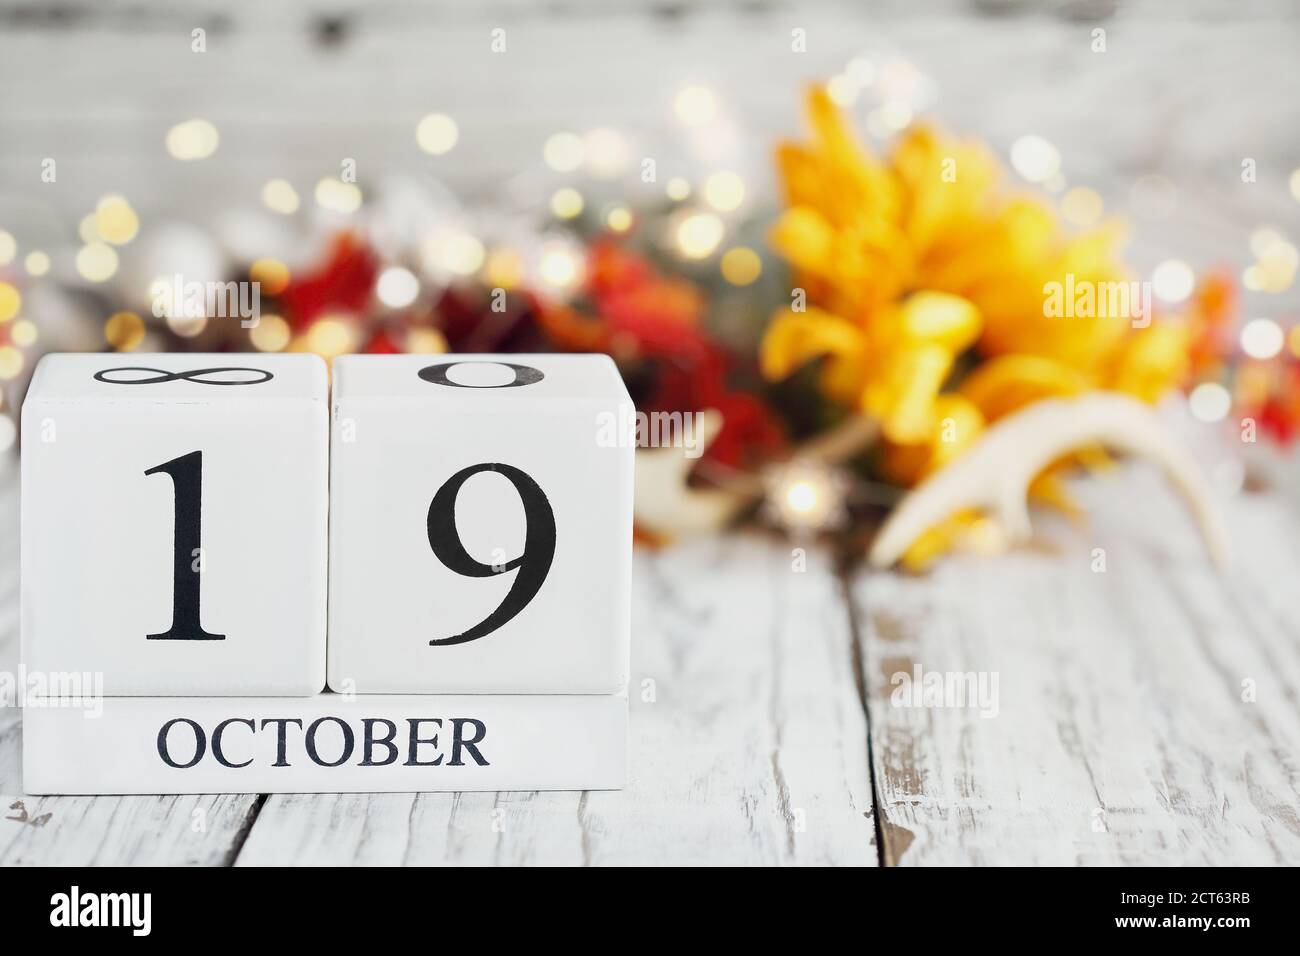 White wood calendar blocks with the date October 19th and autumn decorations over a wooden table. Selective focus with blurred background. Stock Photo